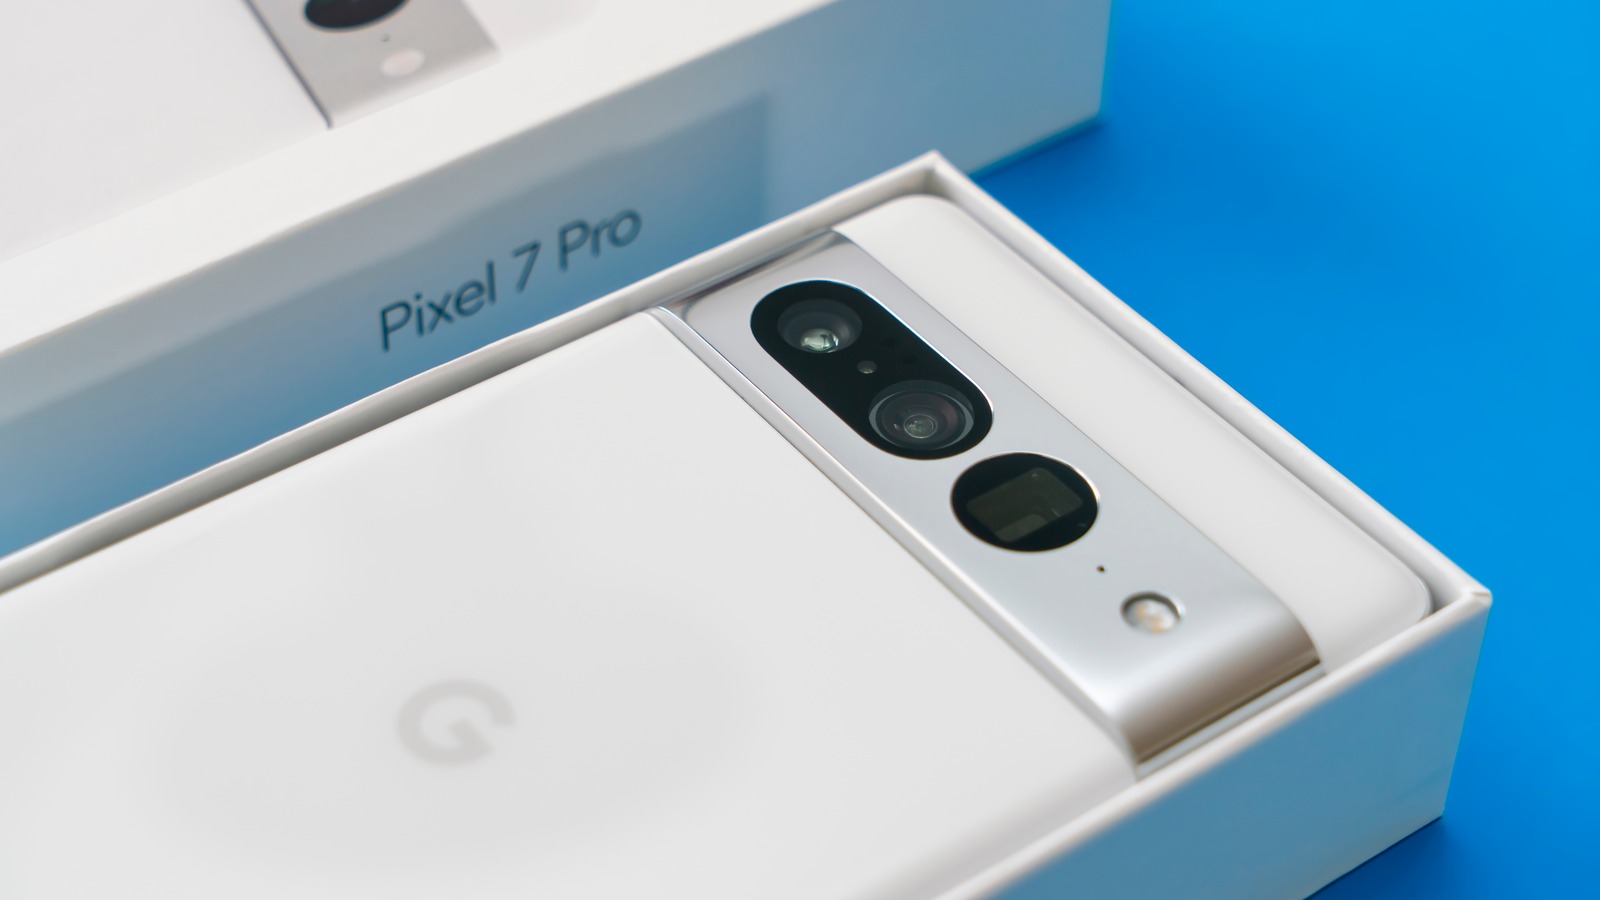 The Easiest Way To Transfer Data To Your New Google Pixel – SlashGear